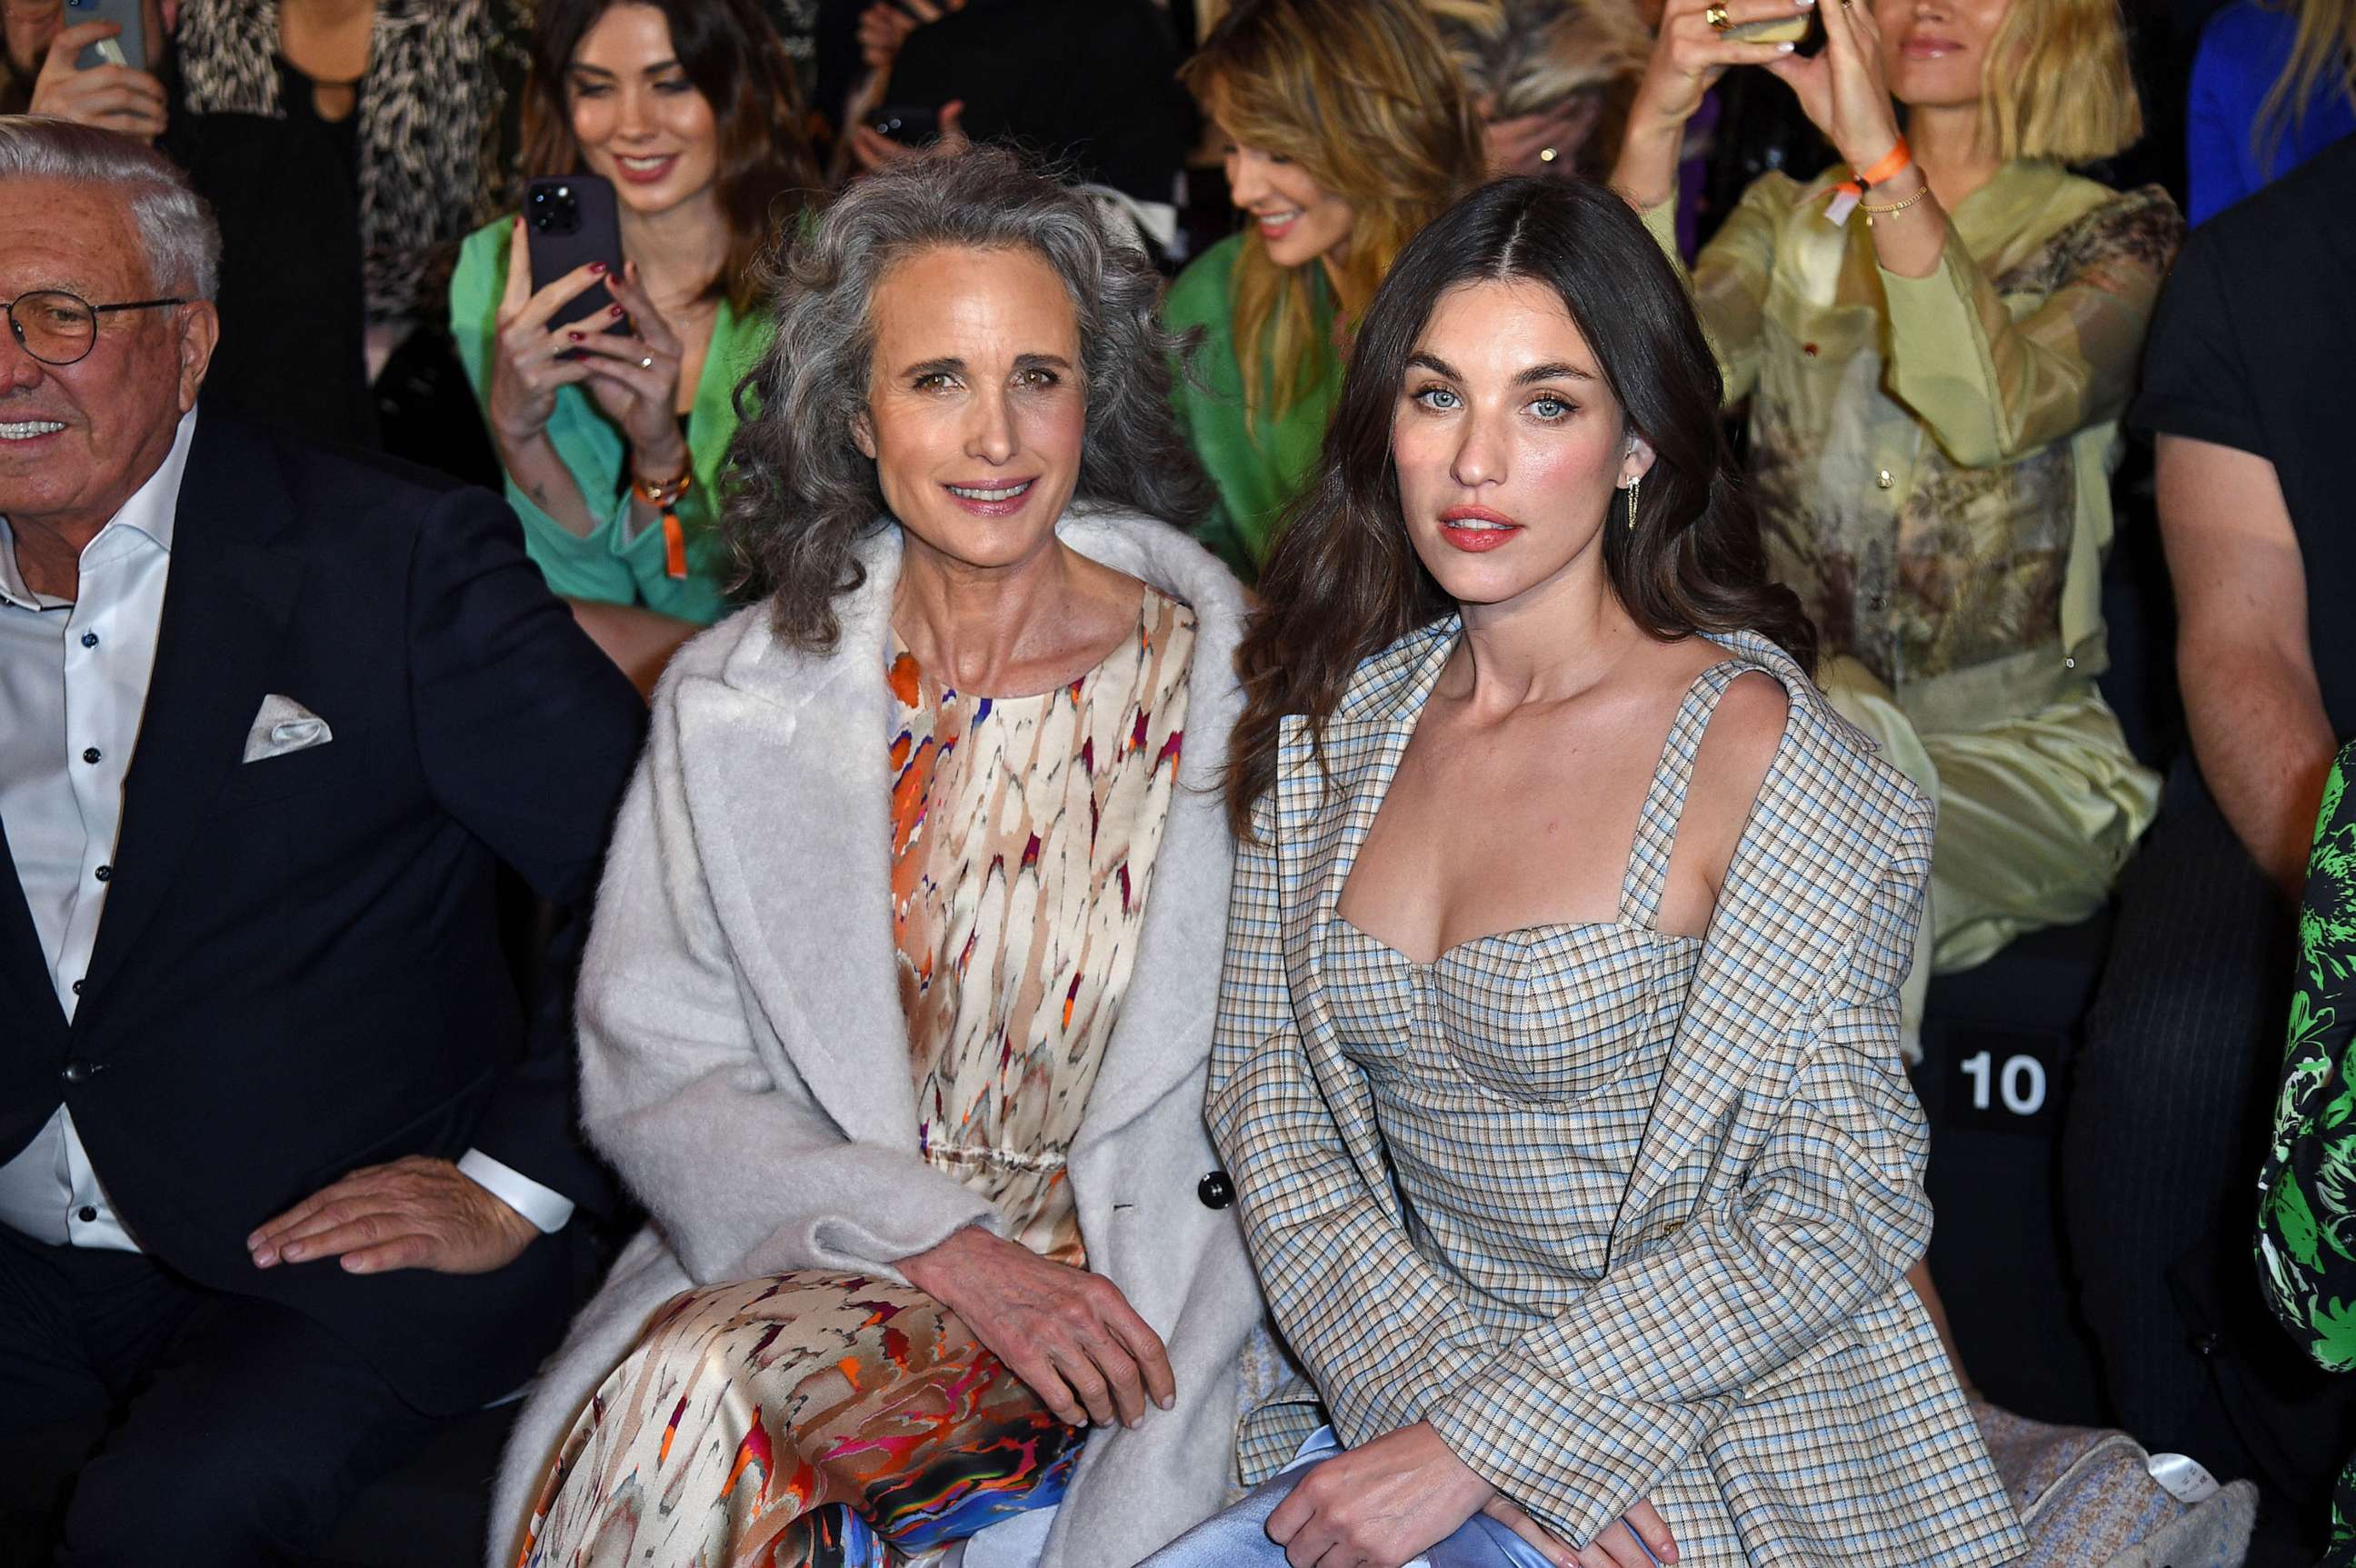 PHOTO: Andie MacDowell and her daughter, singer Rainey Qualley, arrive at the Marc Cain label's show at the offsite fashion show at the former Tempelhof Airport, Berlin, Jan. 19, 2023.